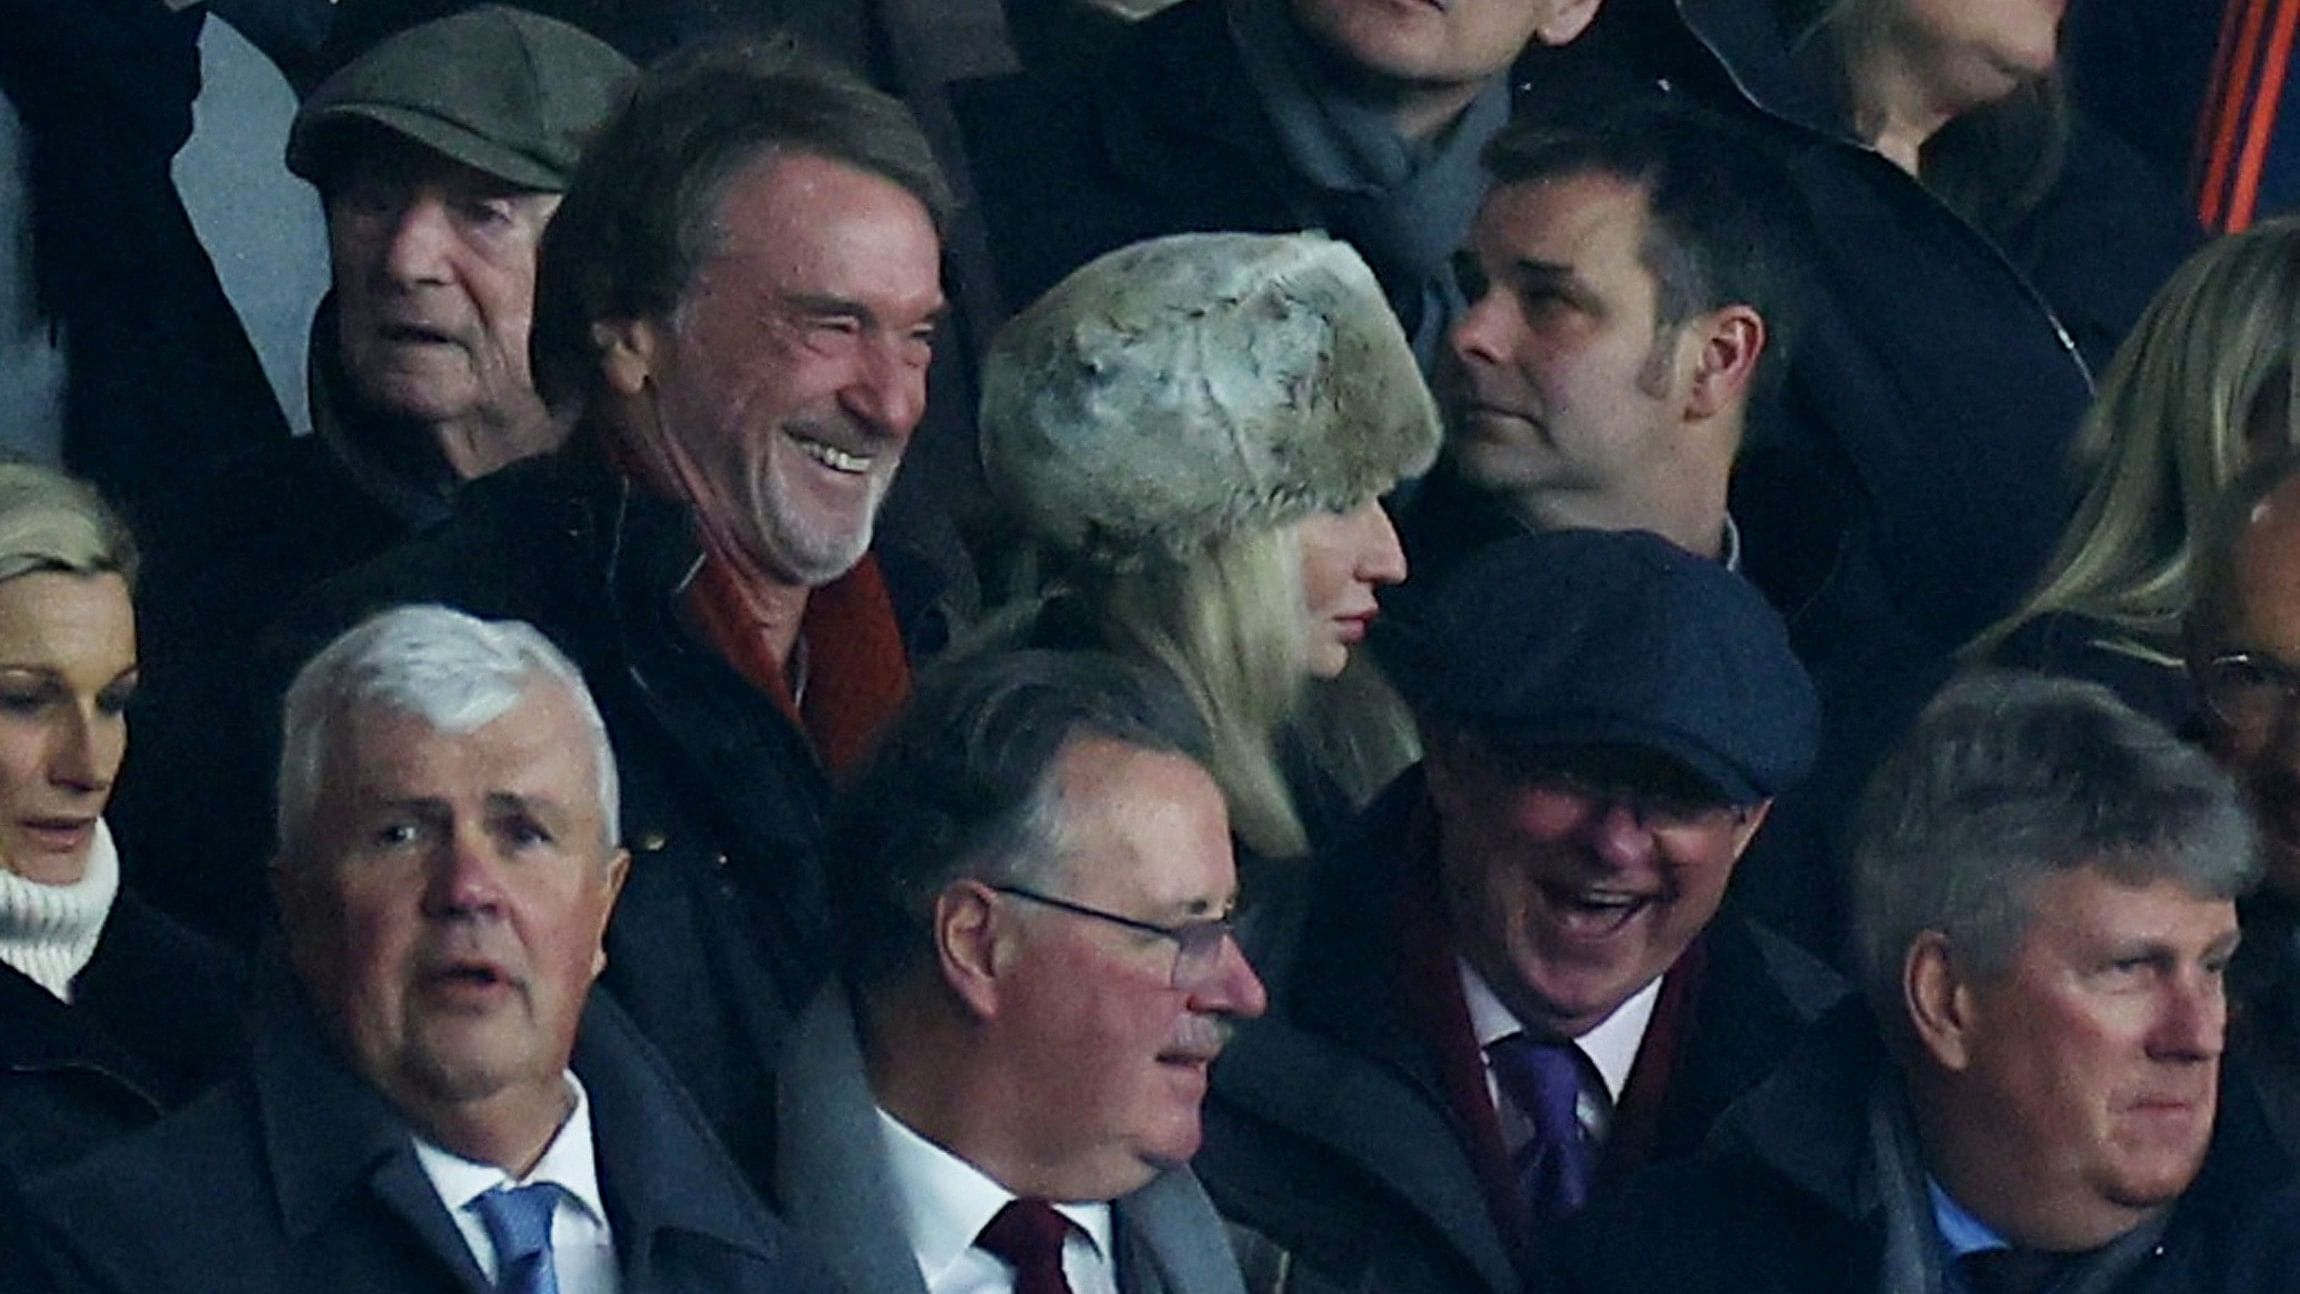 <div class="paragraphs"><p>A file photo of&nbsp;Manchester United co-owner Jim Ratcliffe and former manager Alex Ferguson in the stands before a match.</p></div>